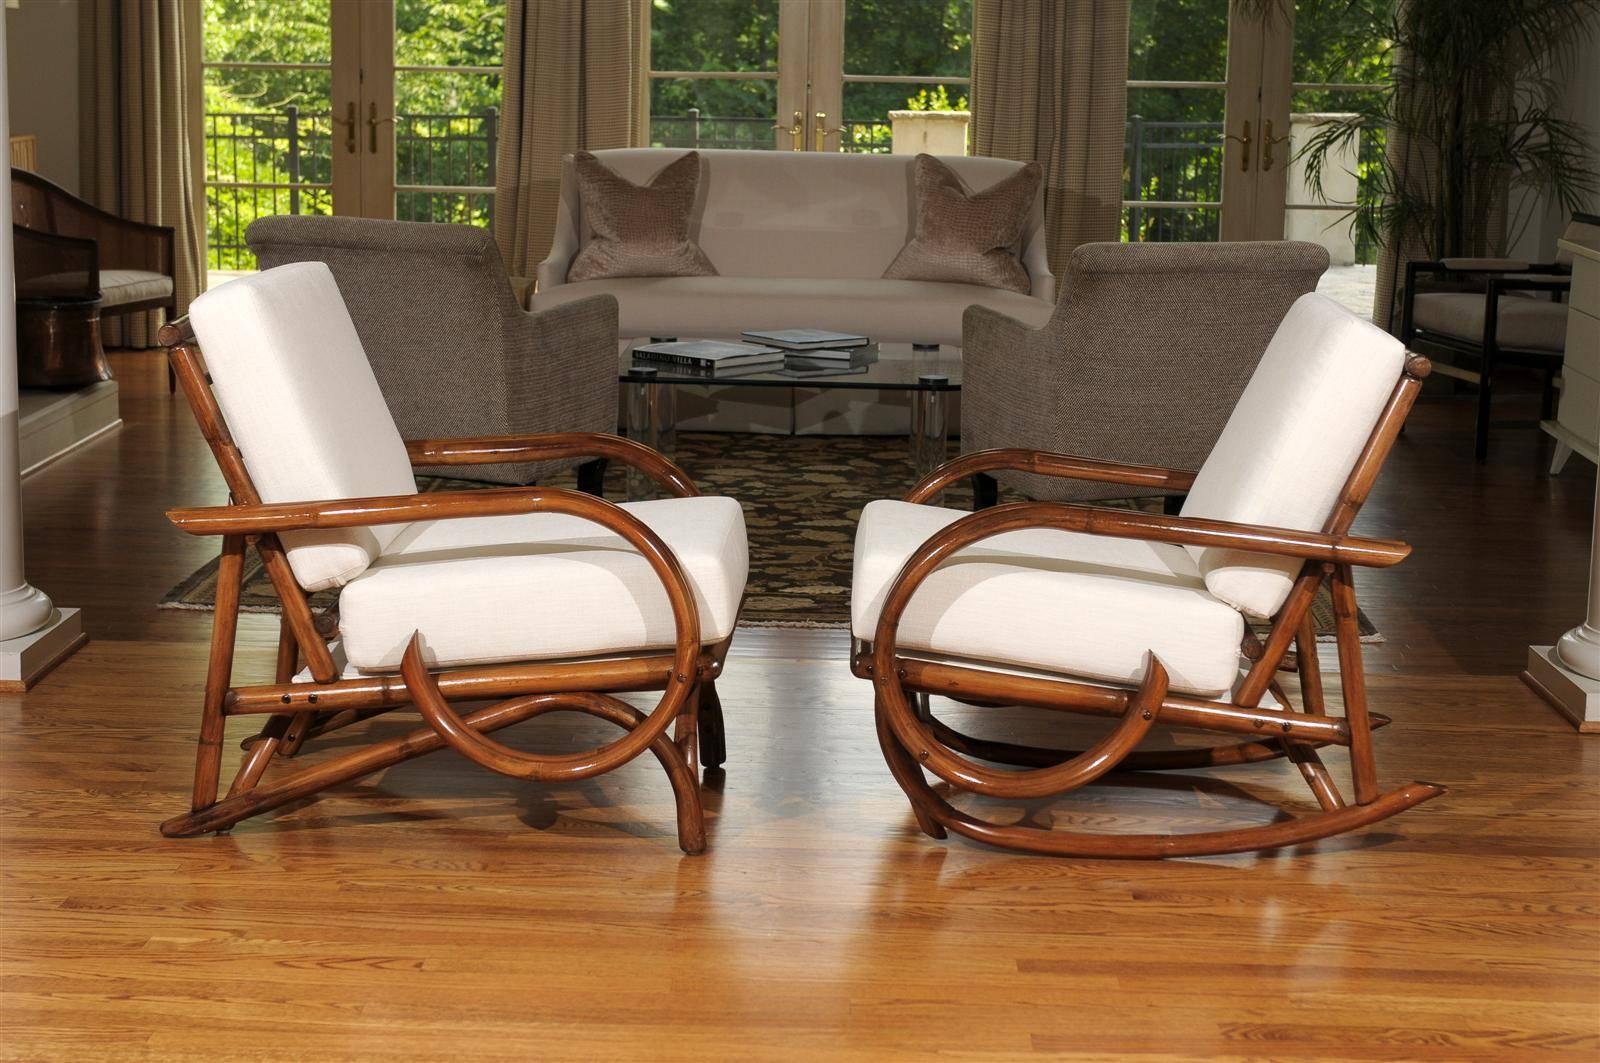 These magnificent lounge chairs are shipped as professionally photographed and described in the listing narrative: Meticulously professionally restored and installation ready. Expert custom upholstery service is available.

An unusually beautiful